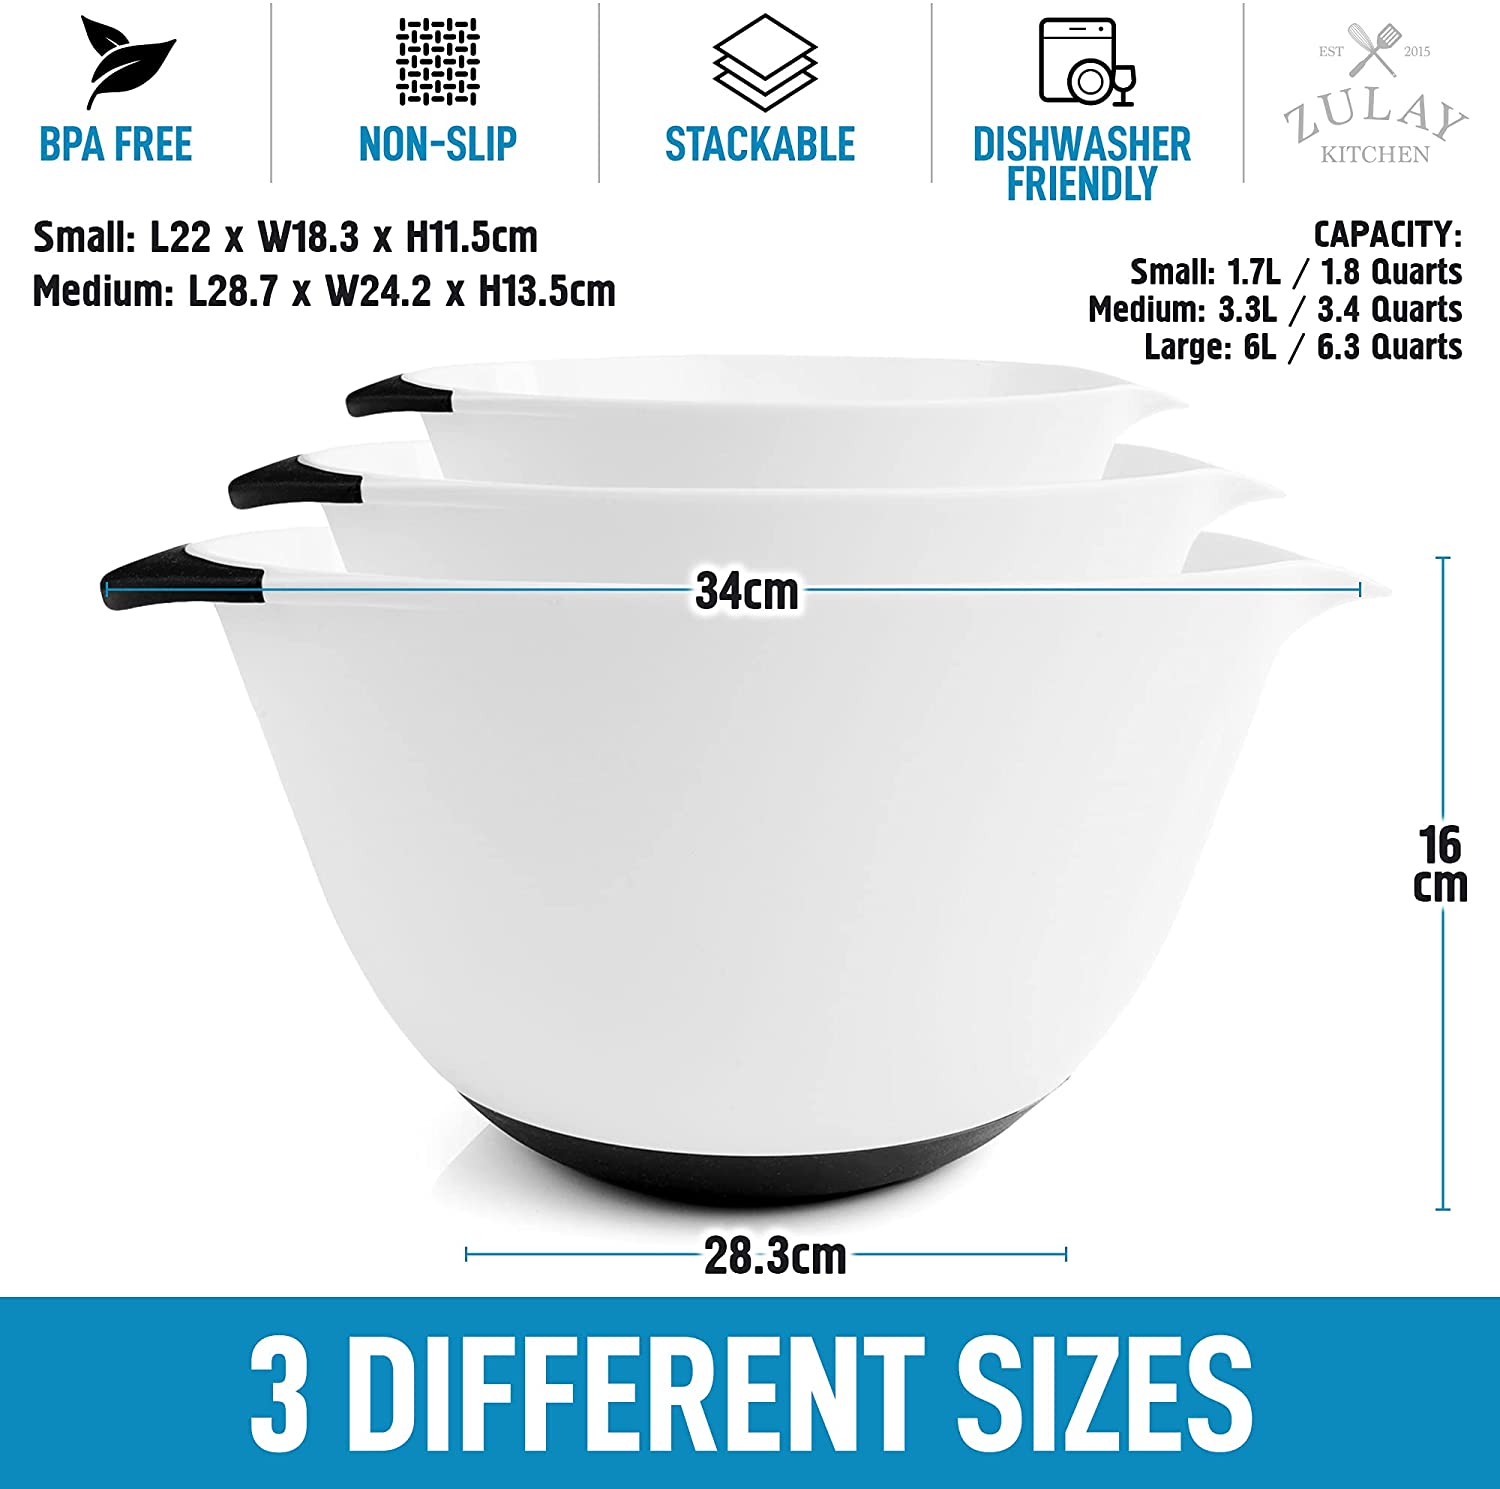 Bpa Free Plastic Round Mixing Bowl With Lids, Nesting Bowls With